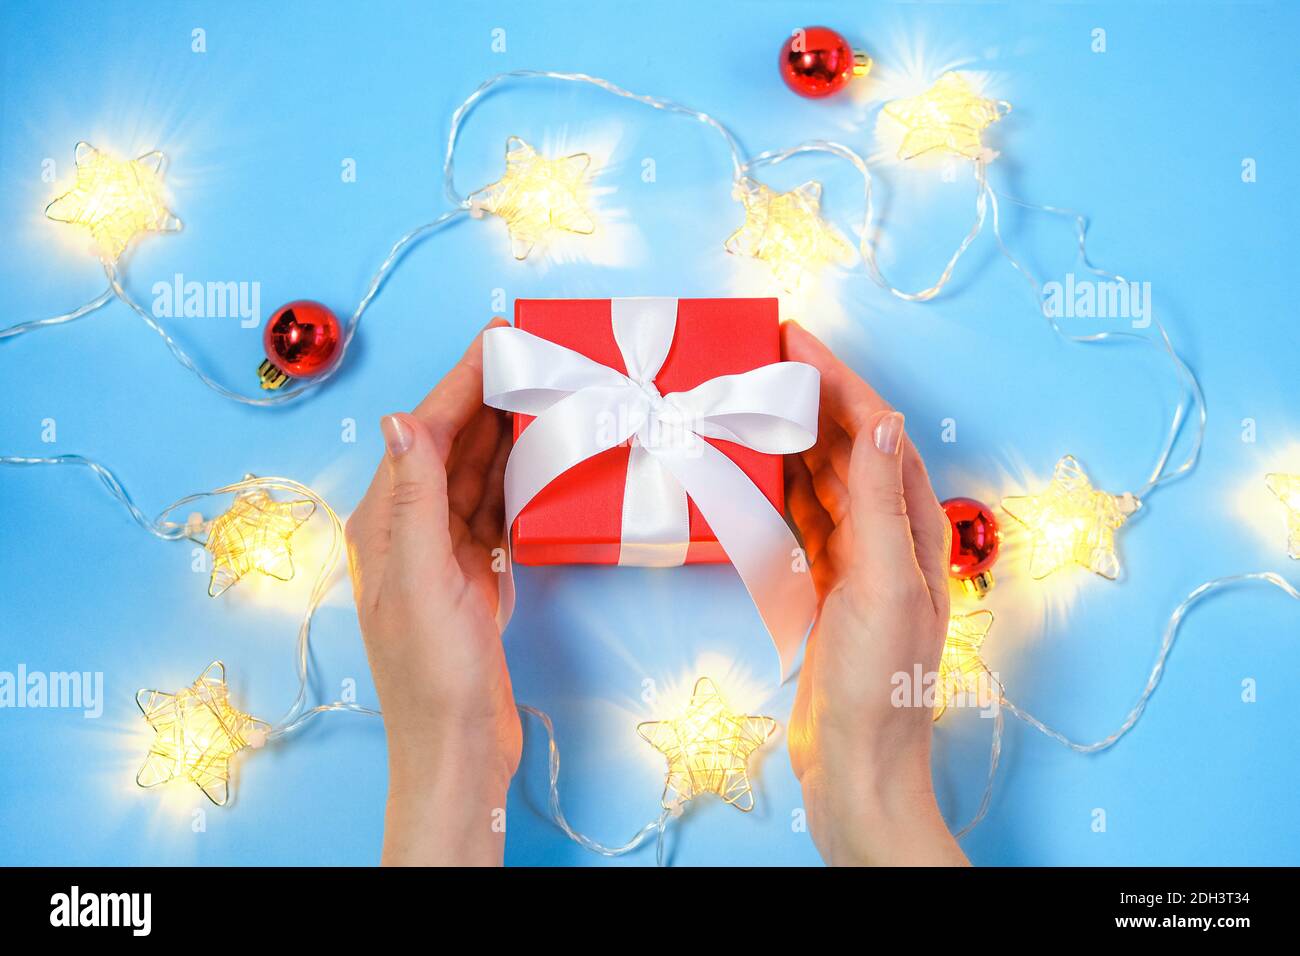 Woman's hands taking or giving colorful red present with luxury white ribbons on lignt blue background with Christmas decoration. Stock Photo